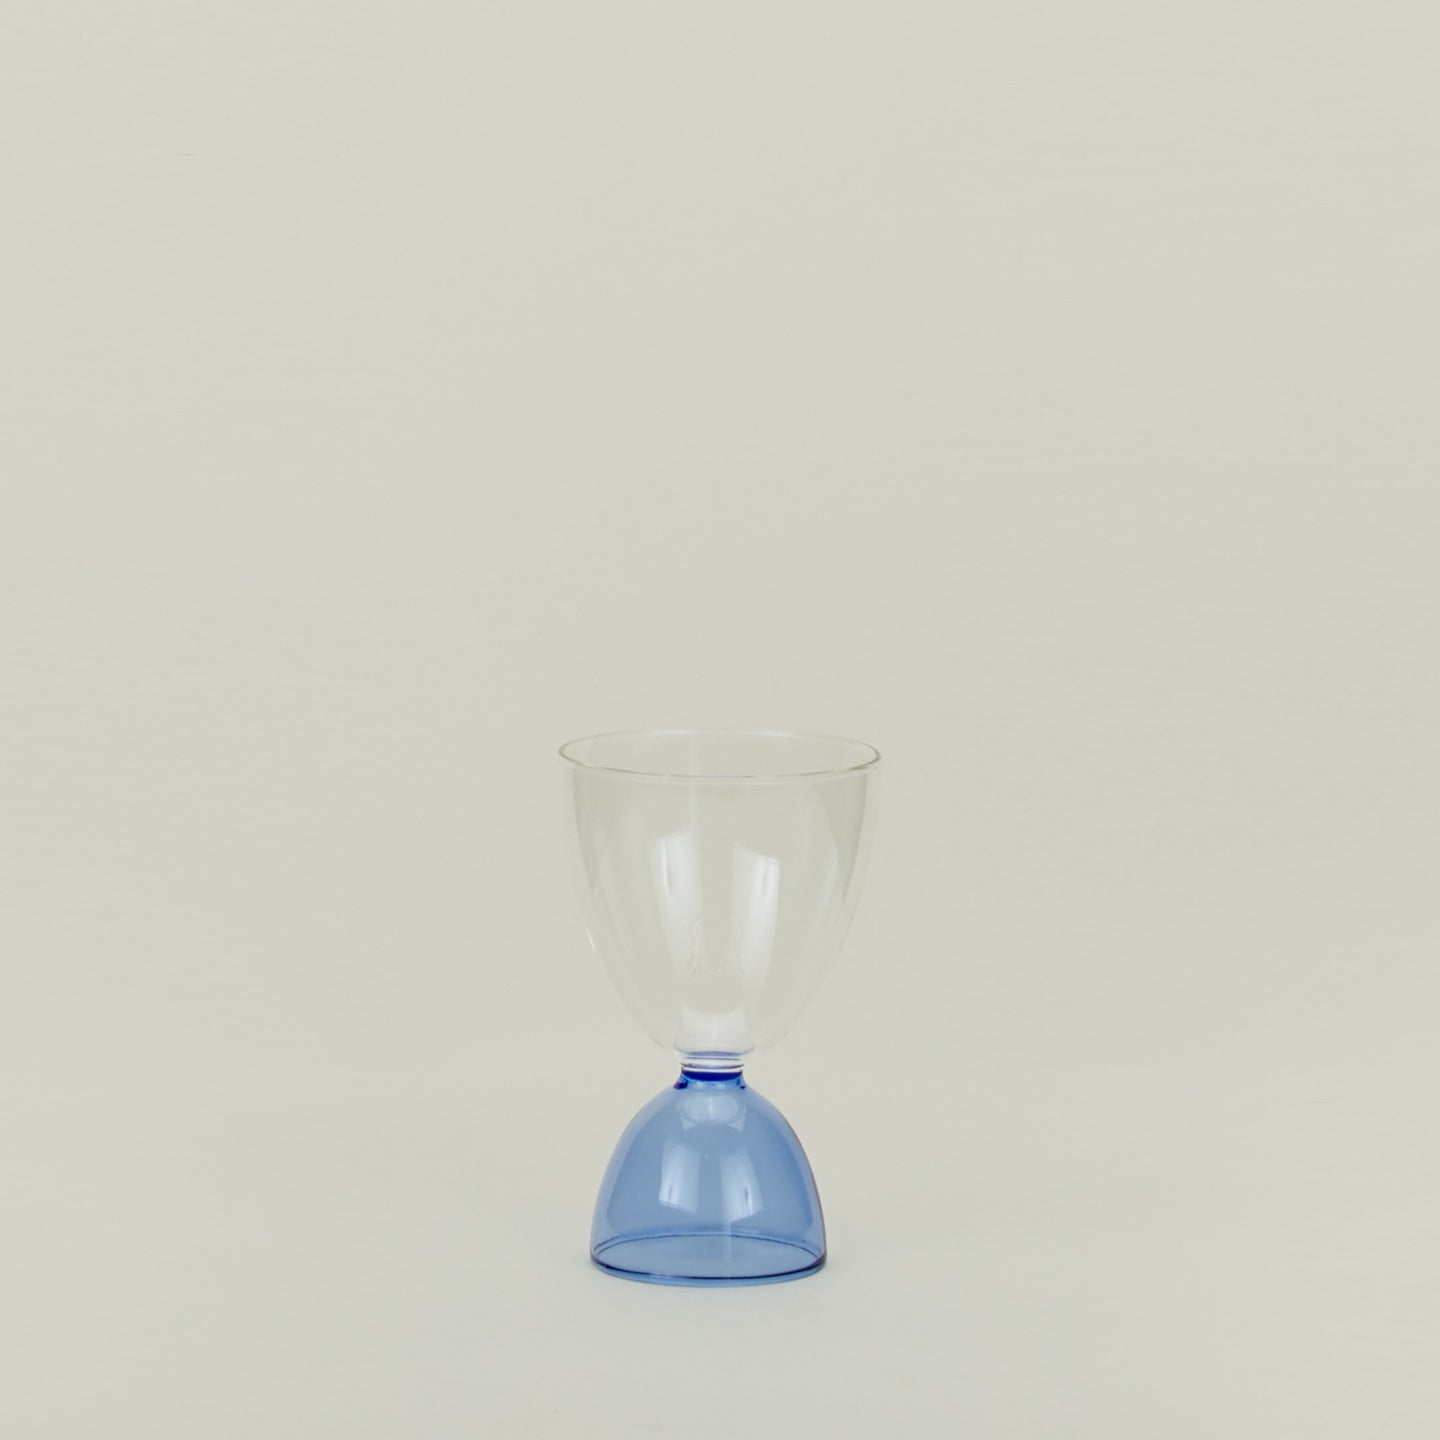 Tumbler glass with blue stem and clear cup.